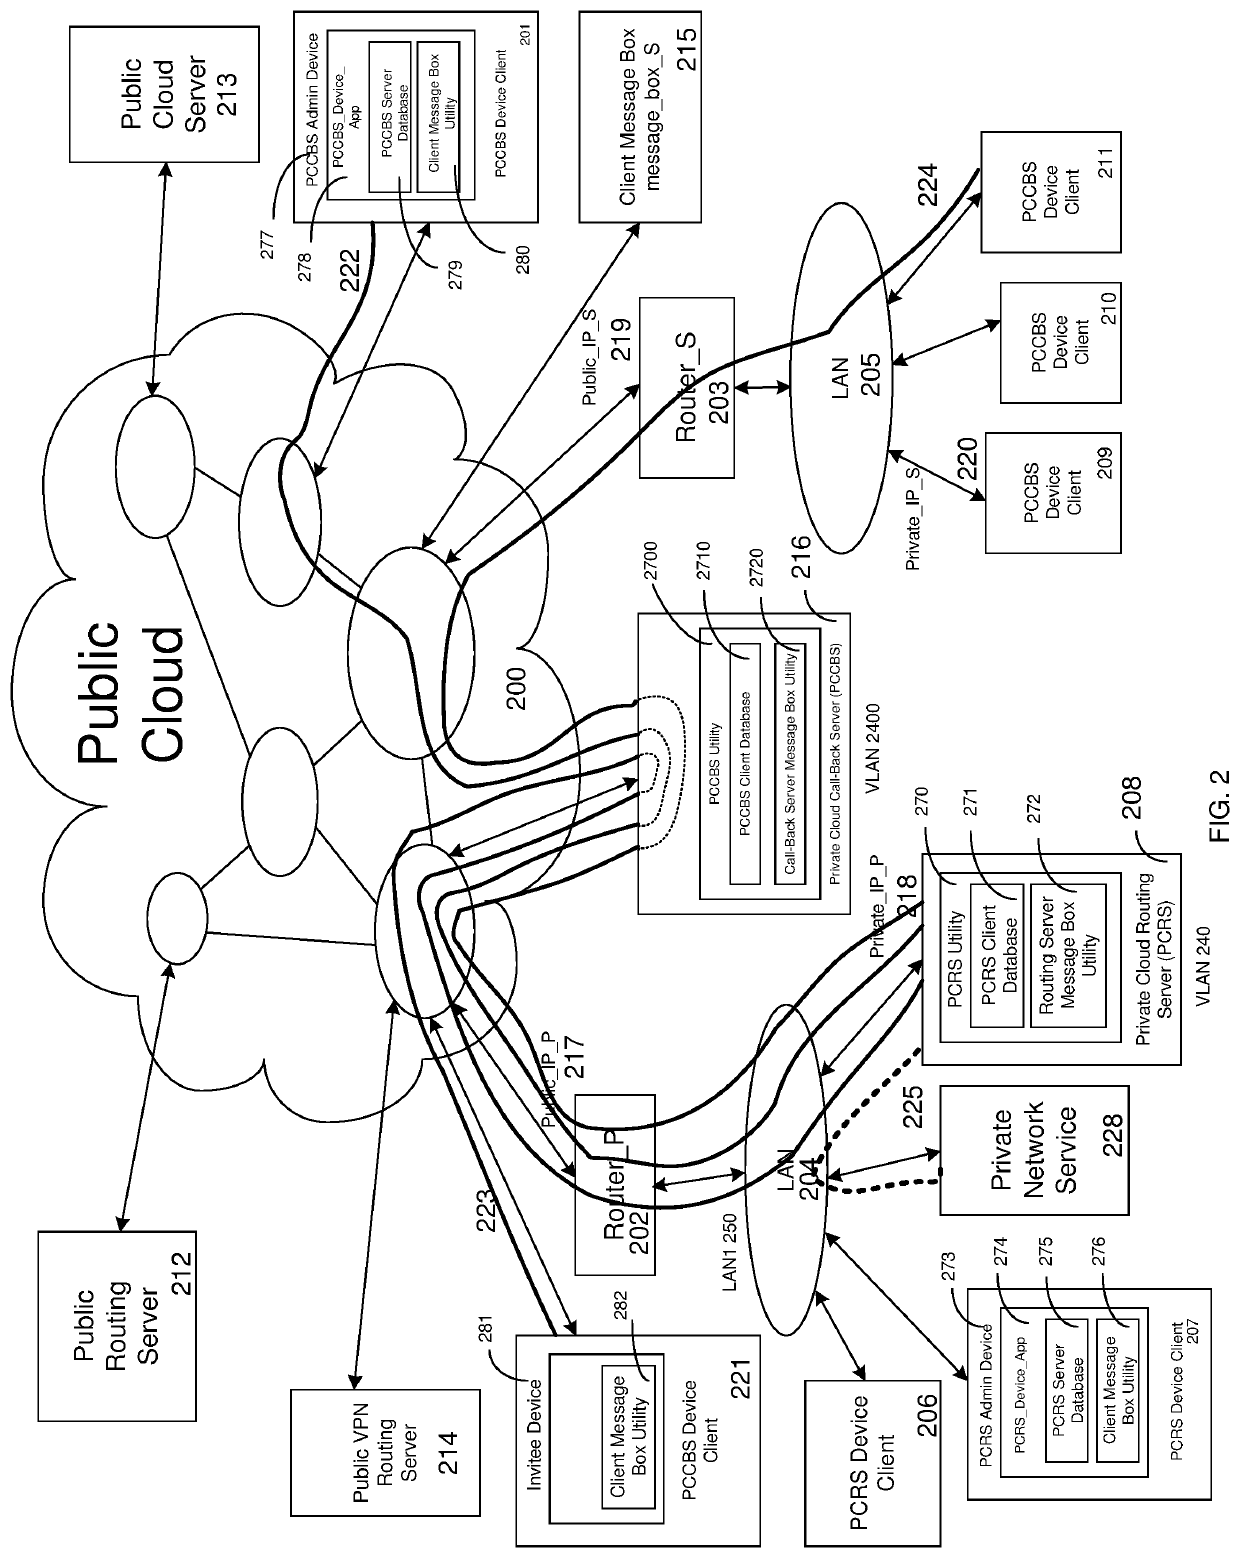 Private cloud routing server connection mechanism for use in a private communication architecture